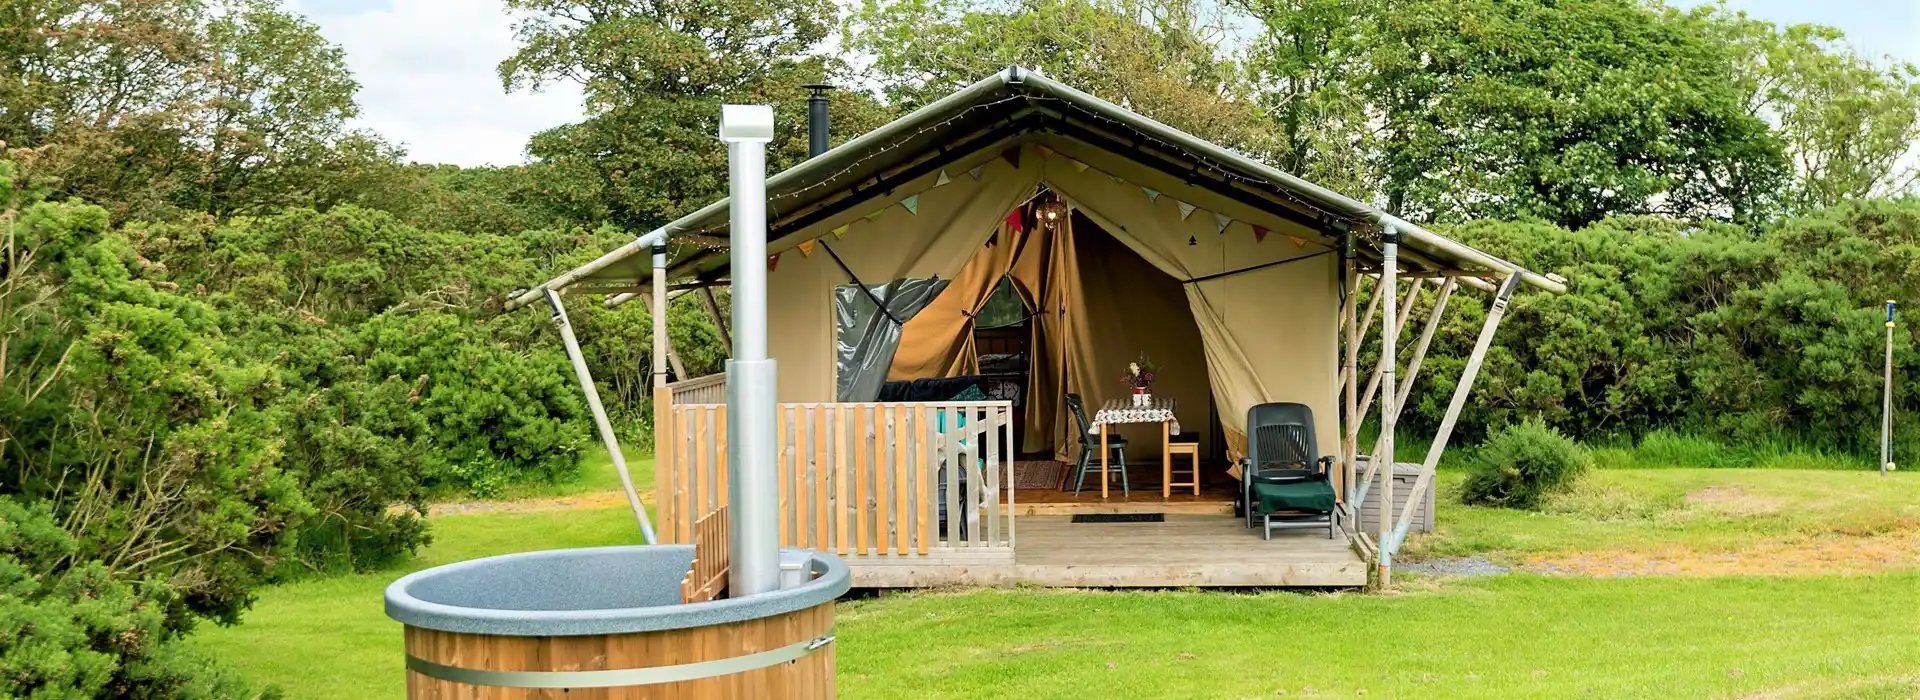 Best one night glamping with hot tubs